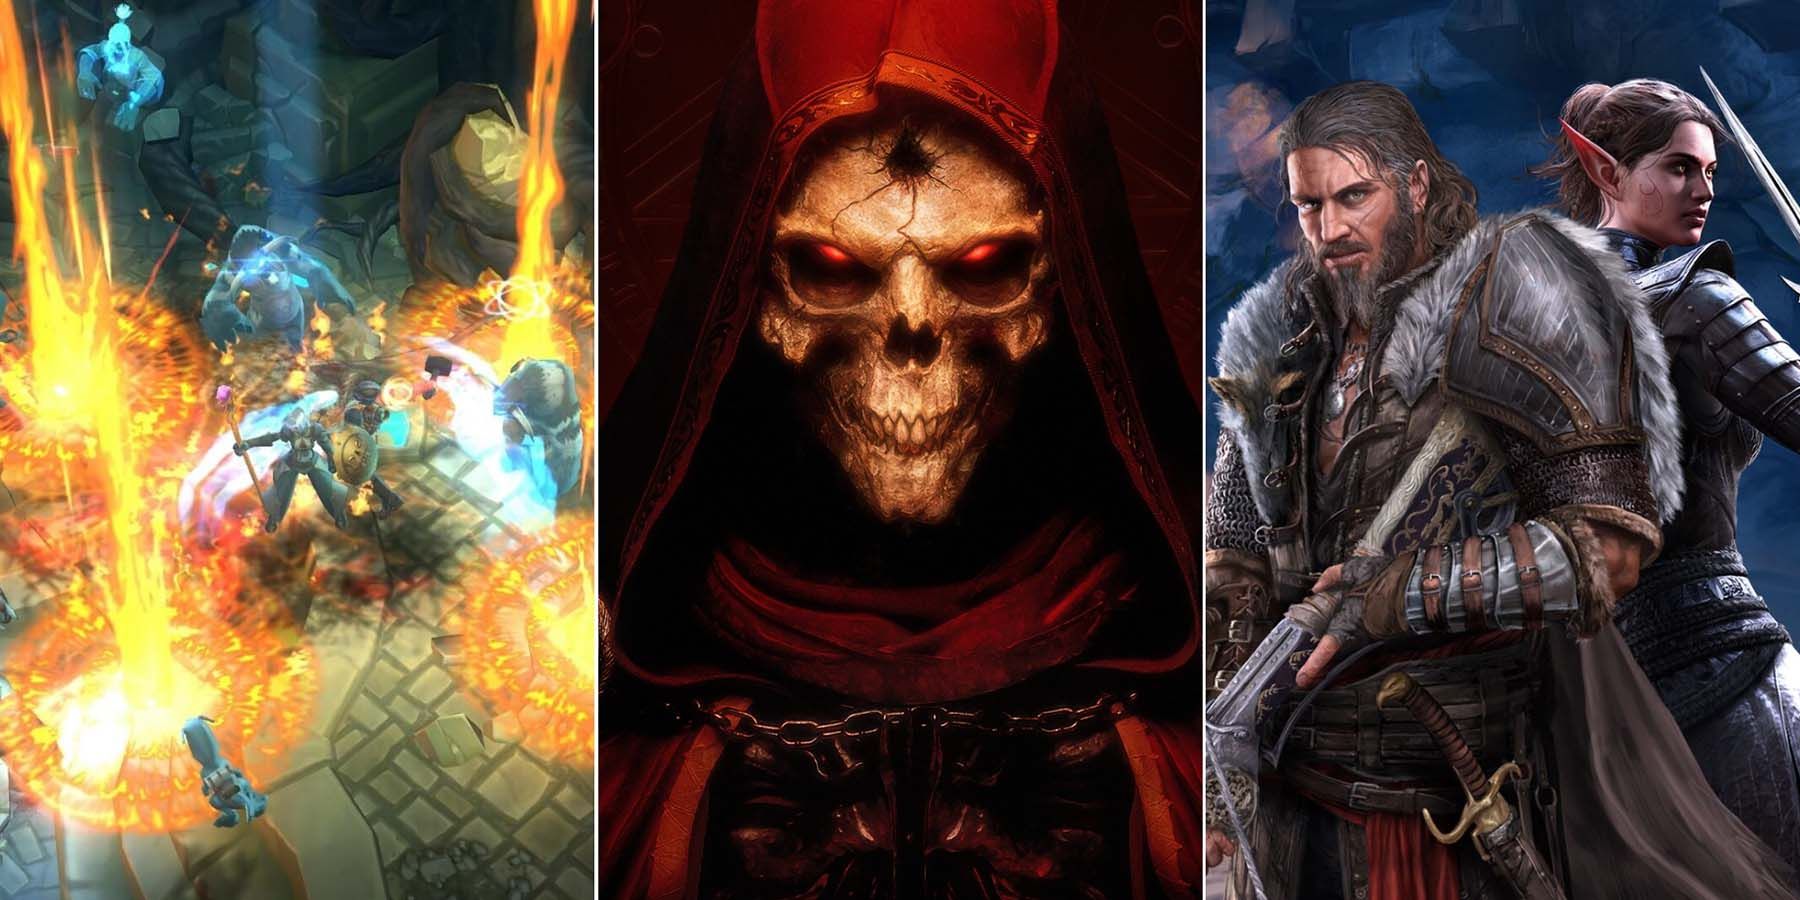 Classic RPGs If You Love Diablo 2 Resurrected featured image